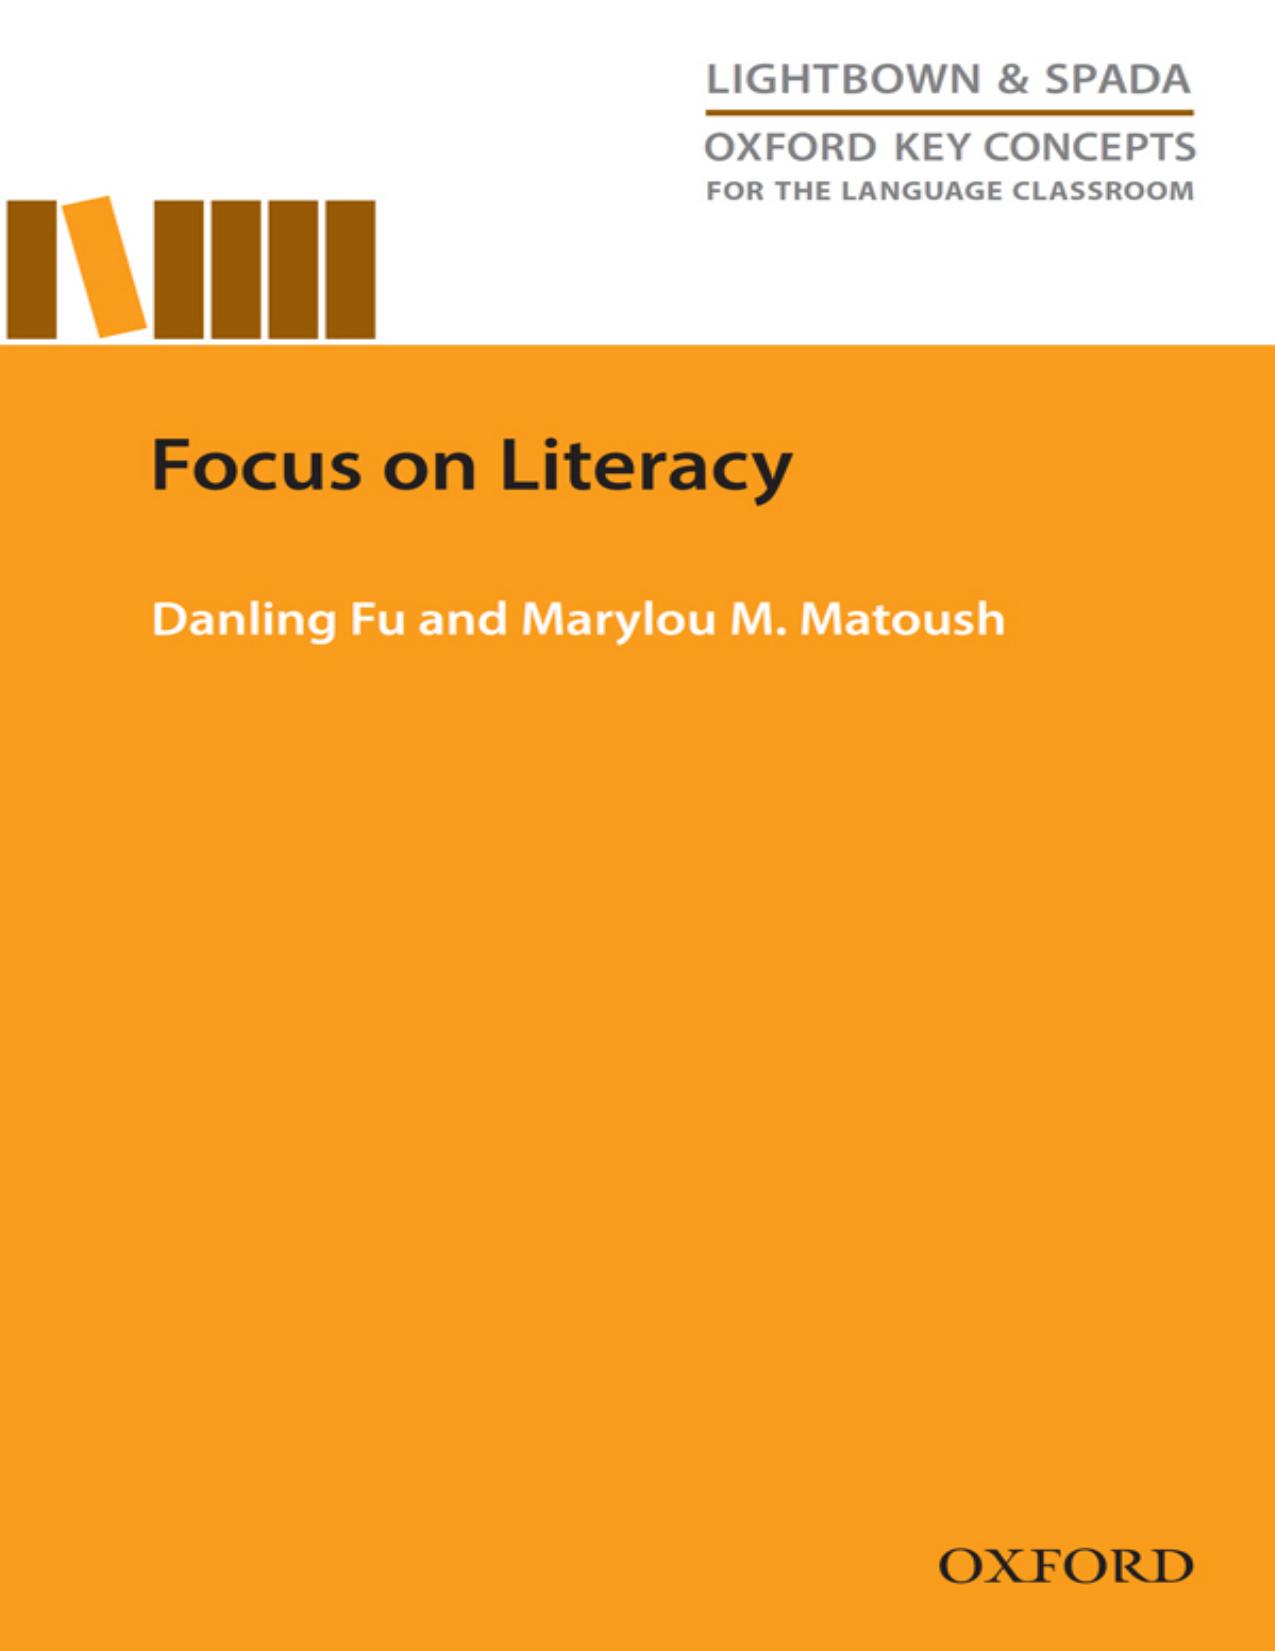 (eBook PDF)Focus on Literacy - Oxford Key Concepts for the Language Classroom by Danling Fu,Marylou M. Matoush